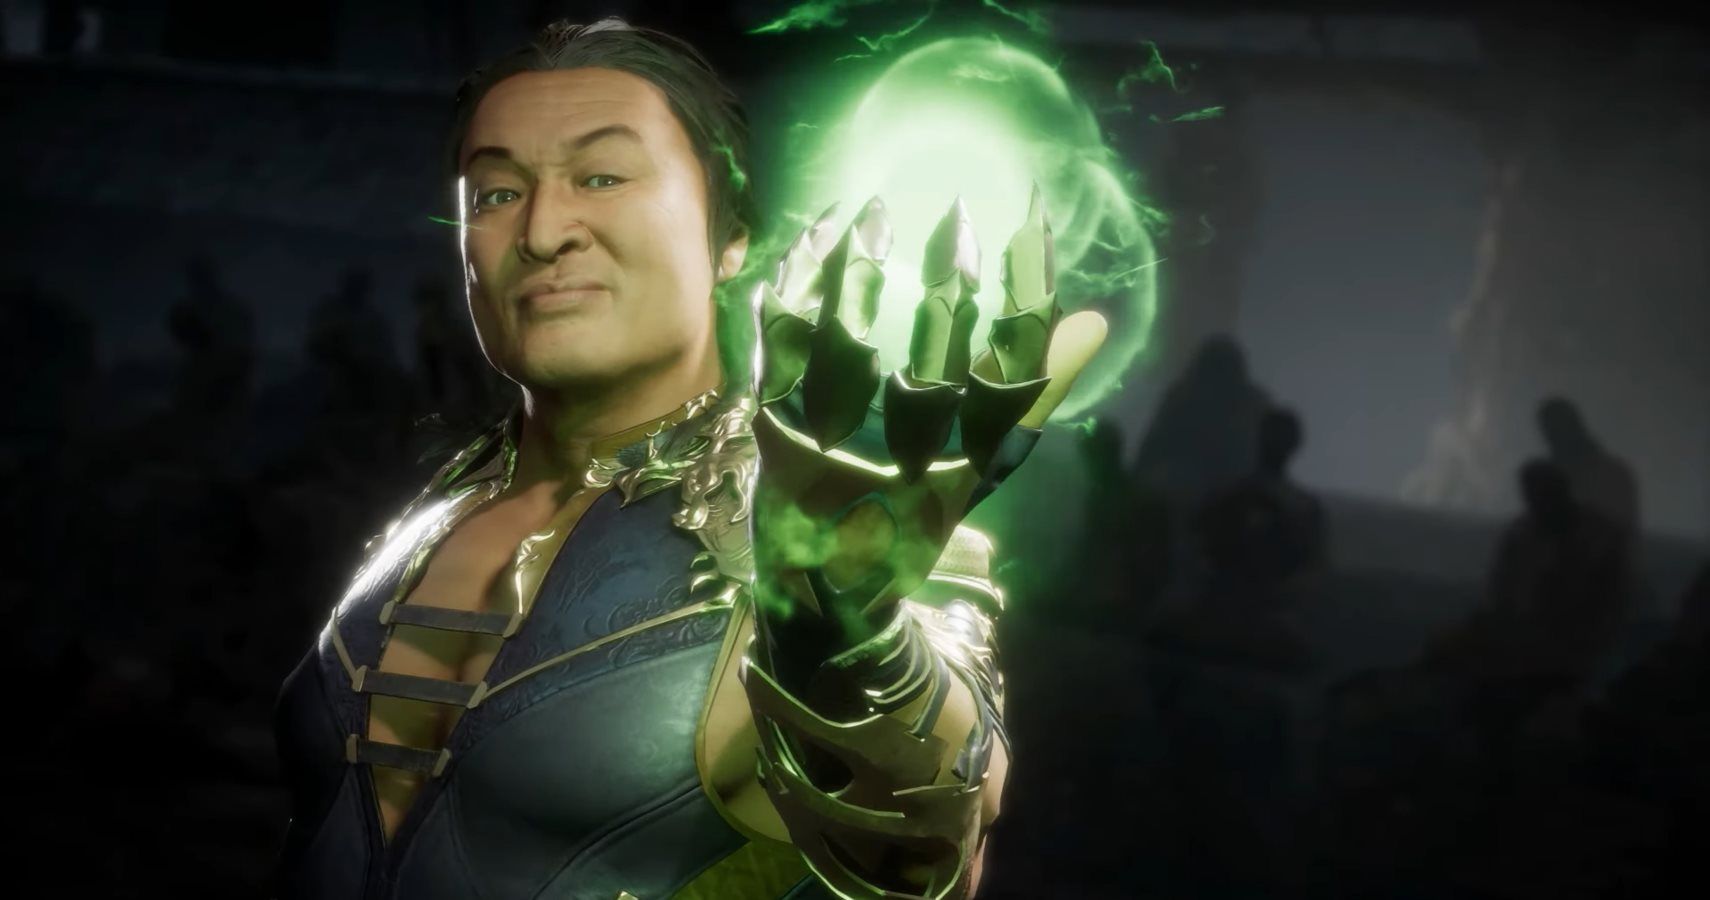 Shang Tsung's Mortal Kombat Movie Costume Is Free With The Kombat Pack